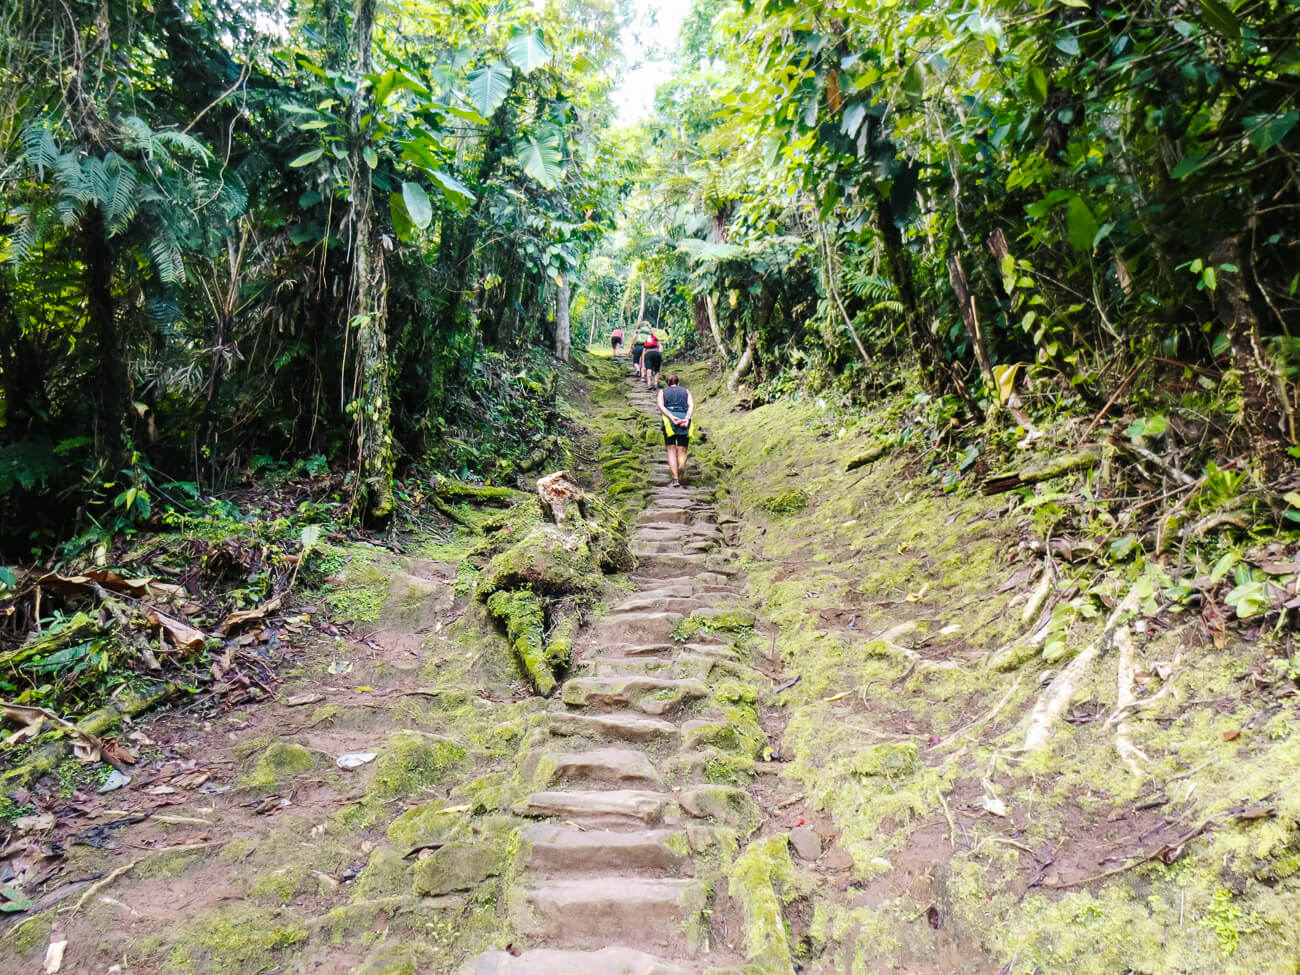 stairs (1250 steps) to Lost City in Colombia